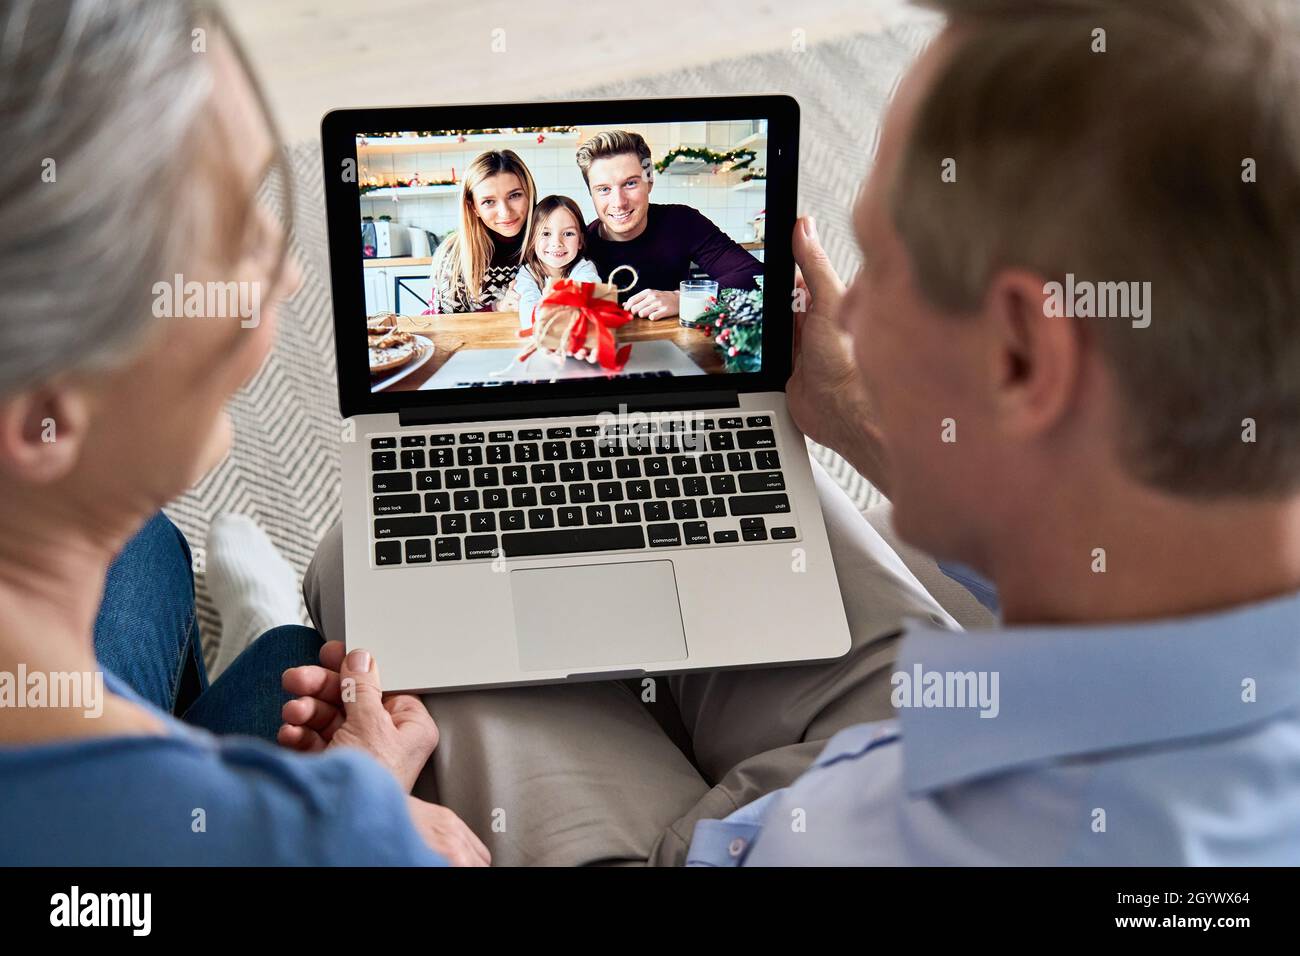 Grandparents video calling family with grandkid on laptop screen. Stock Photo